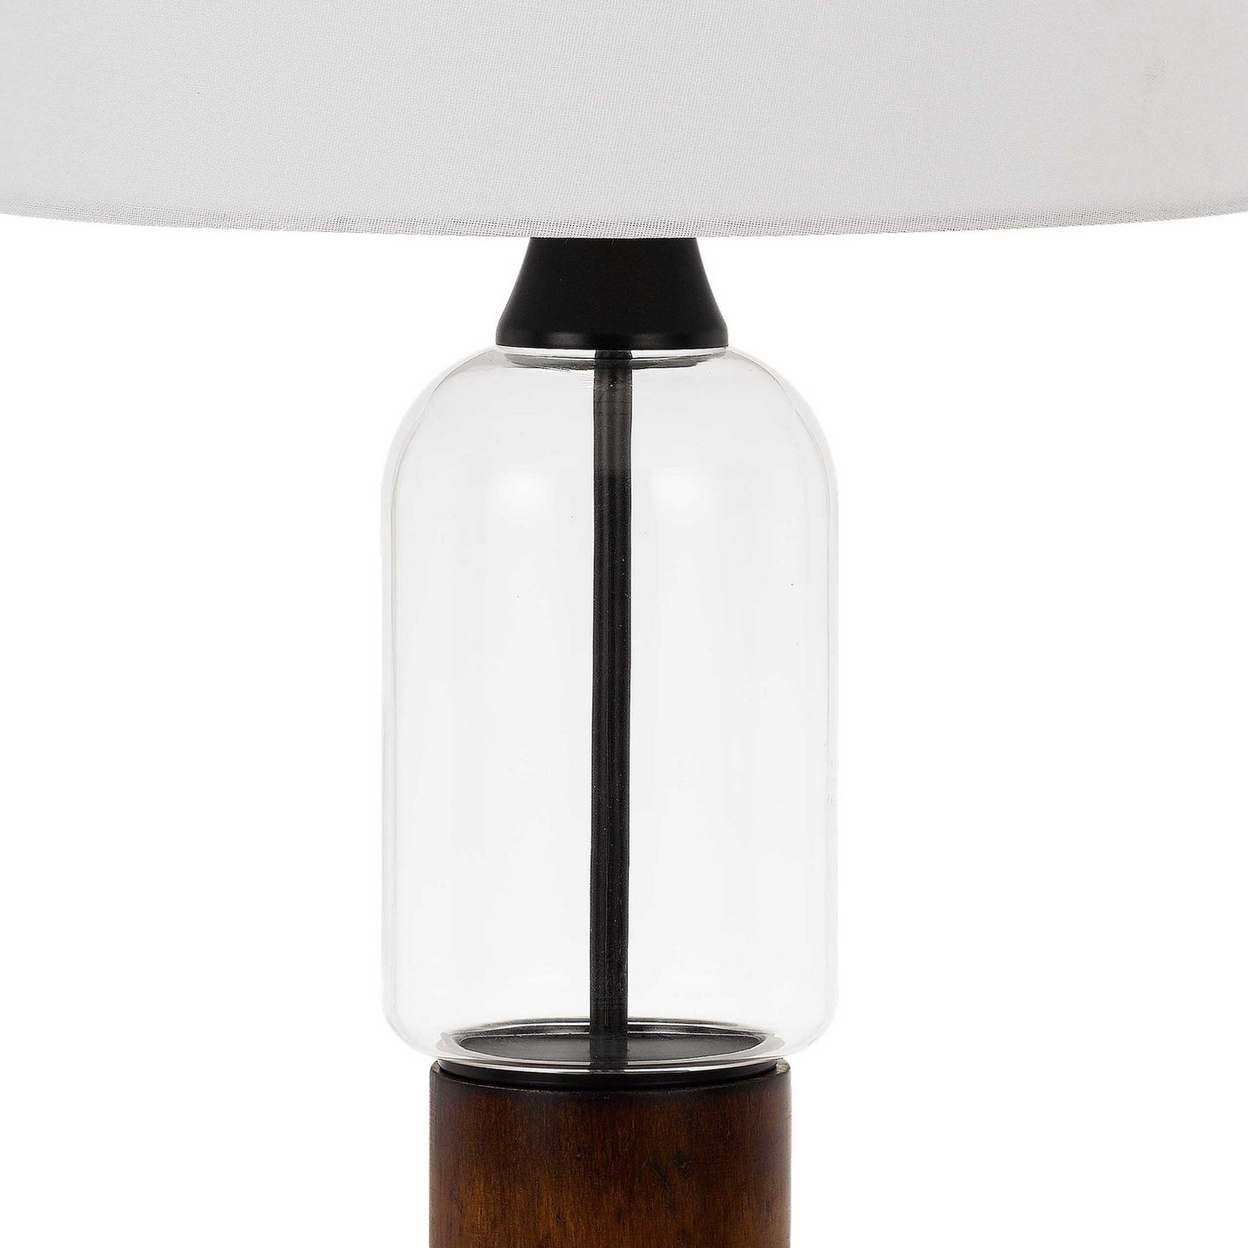 Wooden And Glass Body Table Lamp With Tapered Fabric Shade, White- Saltoro Sherpi